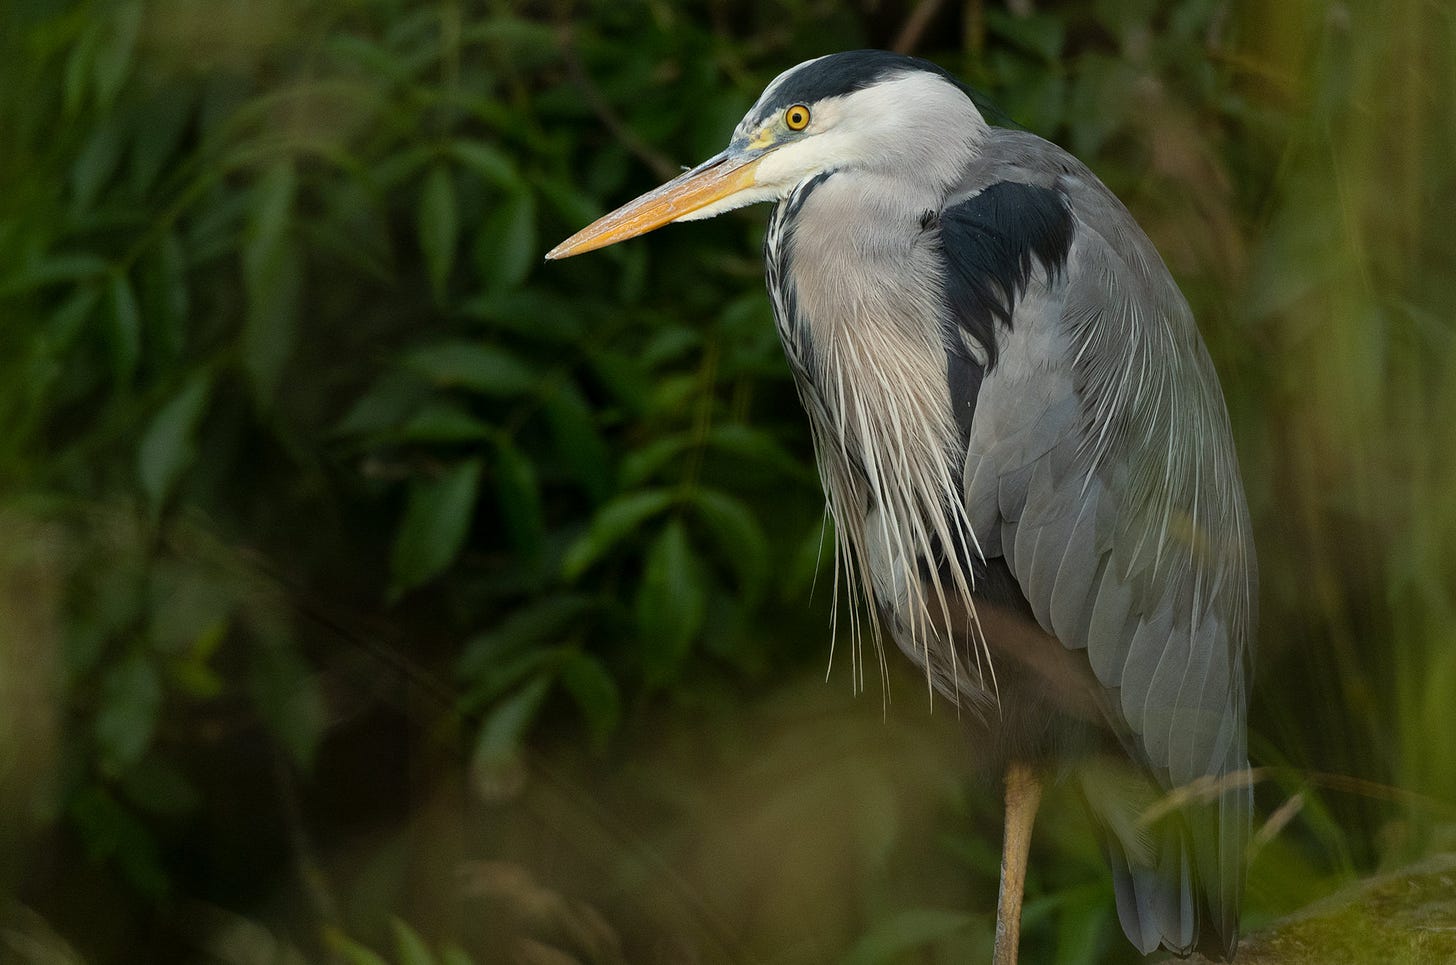 Photo of a grey heron standing still in front of bushes